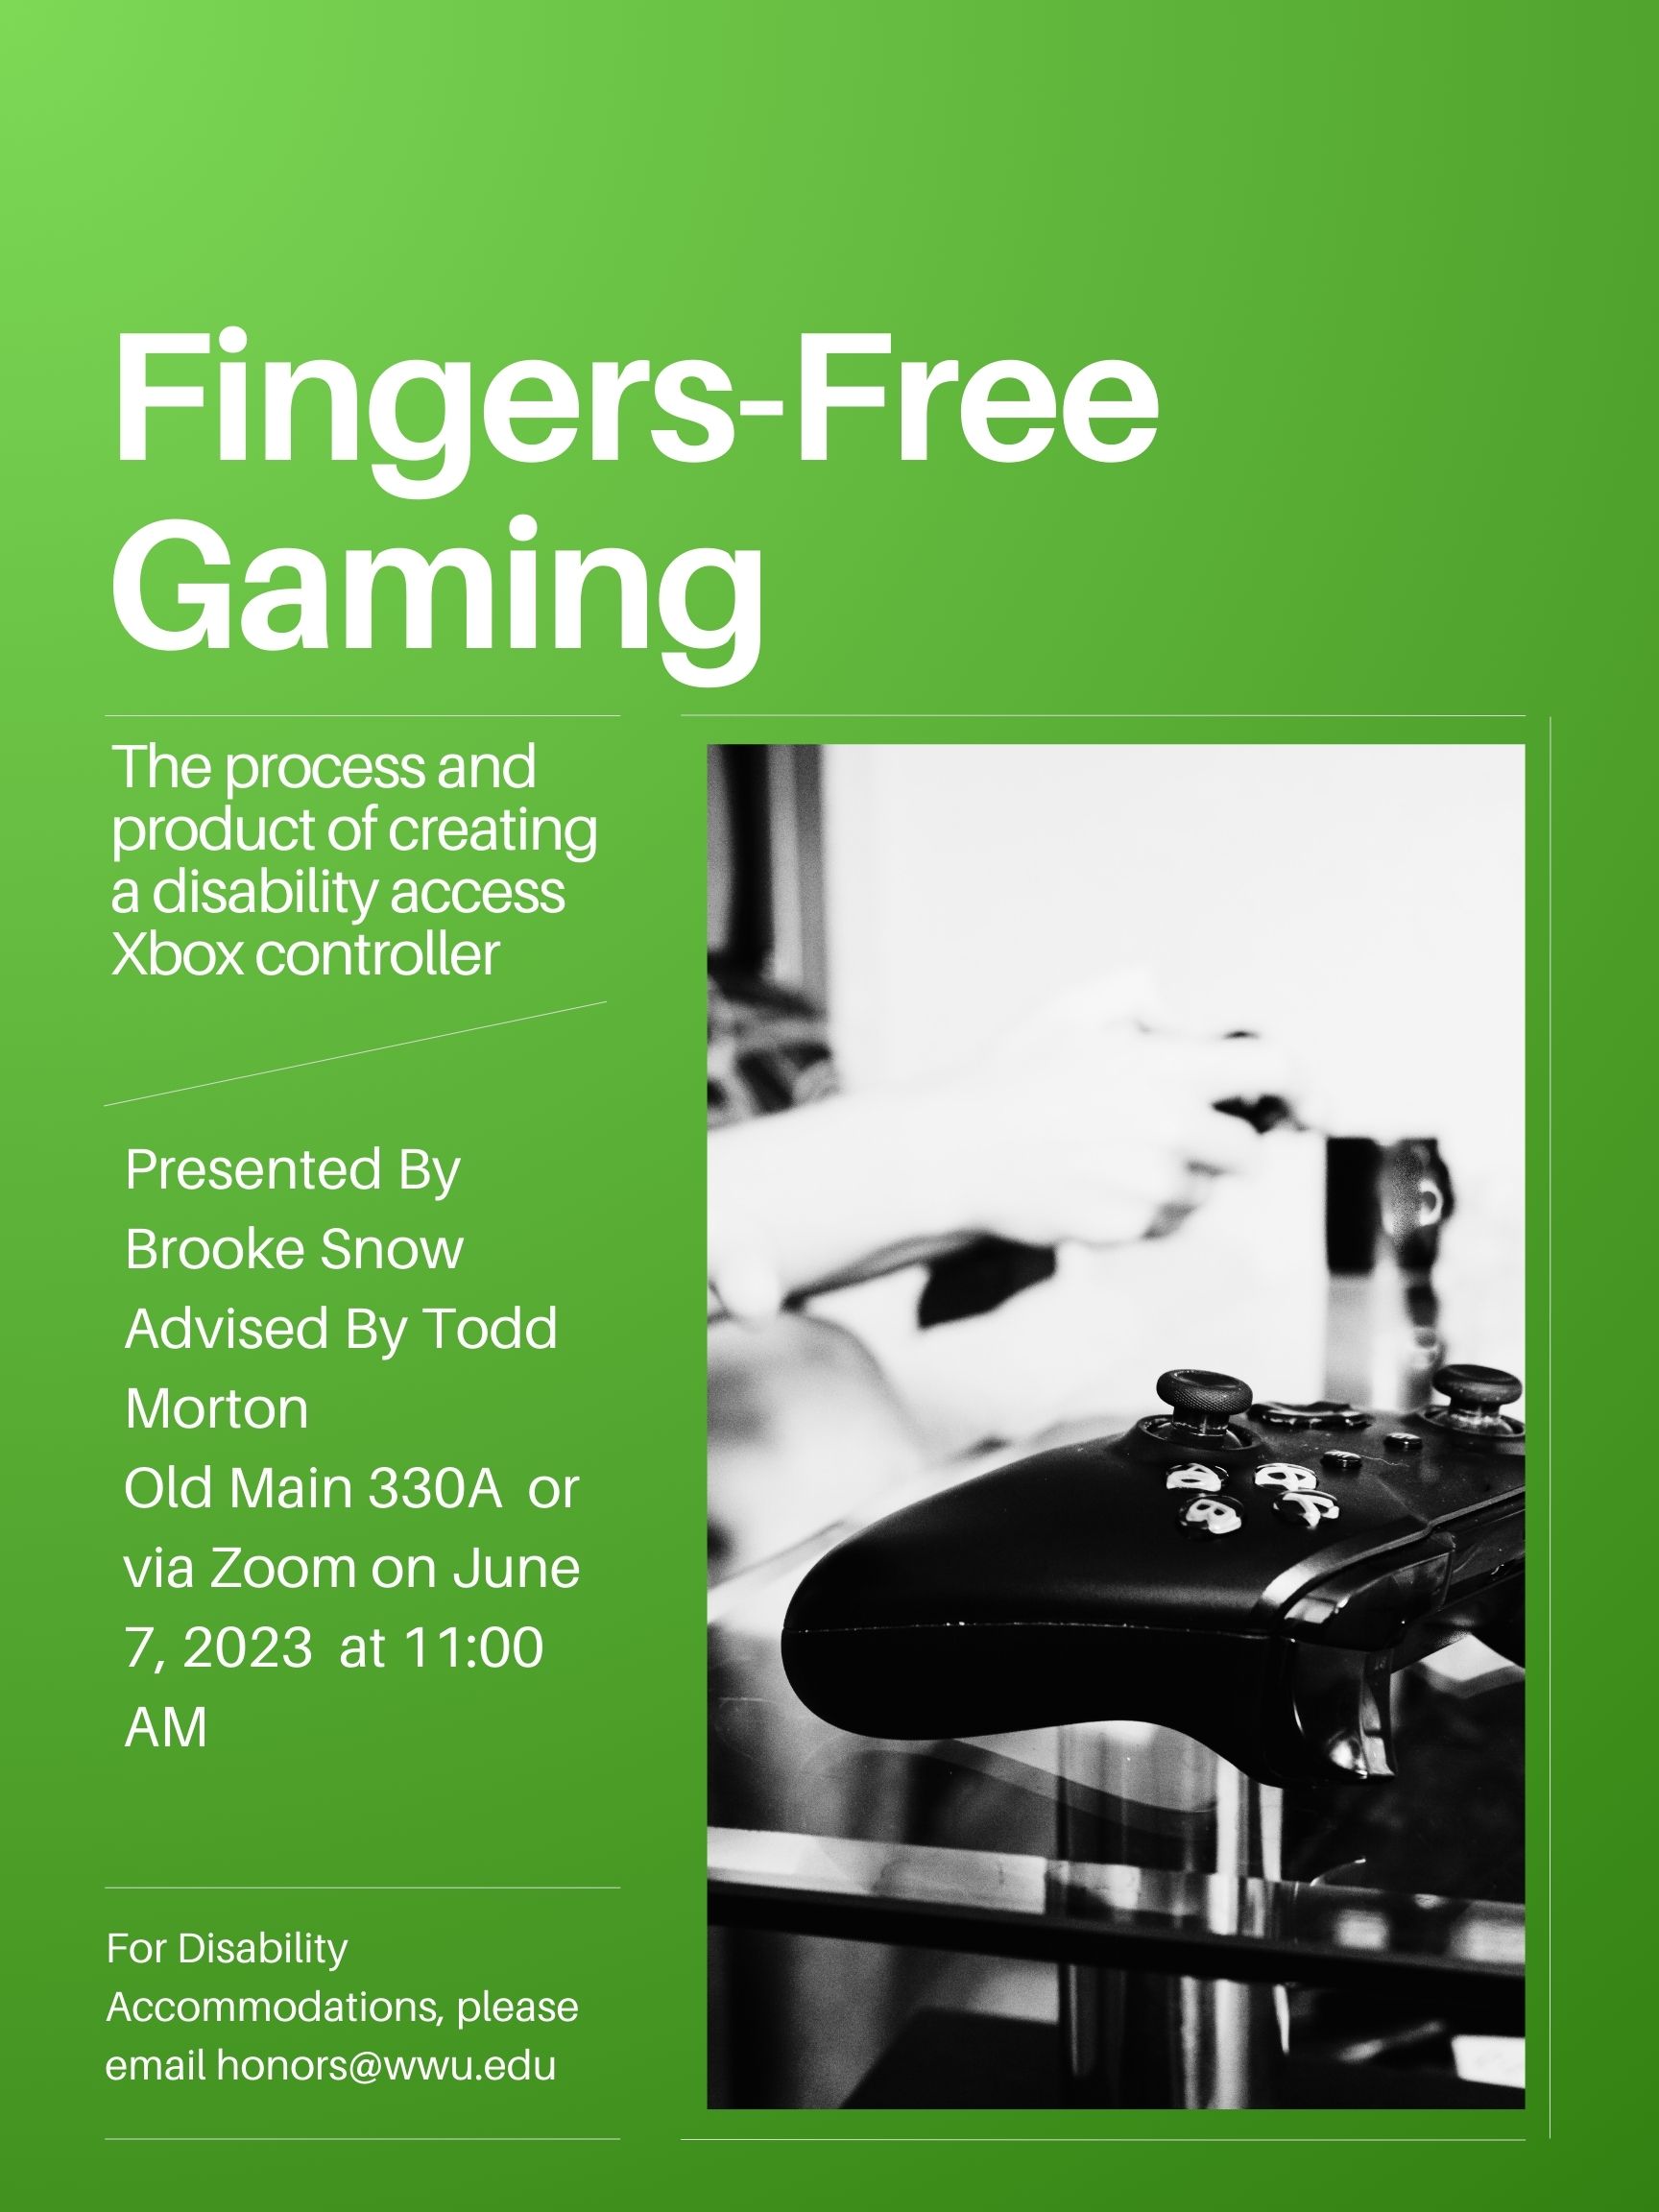 A green poster with black and white image of a traditional Xbox controller on the right half of the background. The text reads: "Fingers-Free Gaming. The process and product of creating a disability access Xbox controller. Presented By Brooke Snow. Advised By Todd Morton. Old Main 330A or via Zoom on June 7, 2023 at 11:00 AM. For Disability Accommodations, please email honors@wwu.edu".